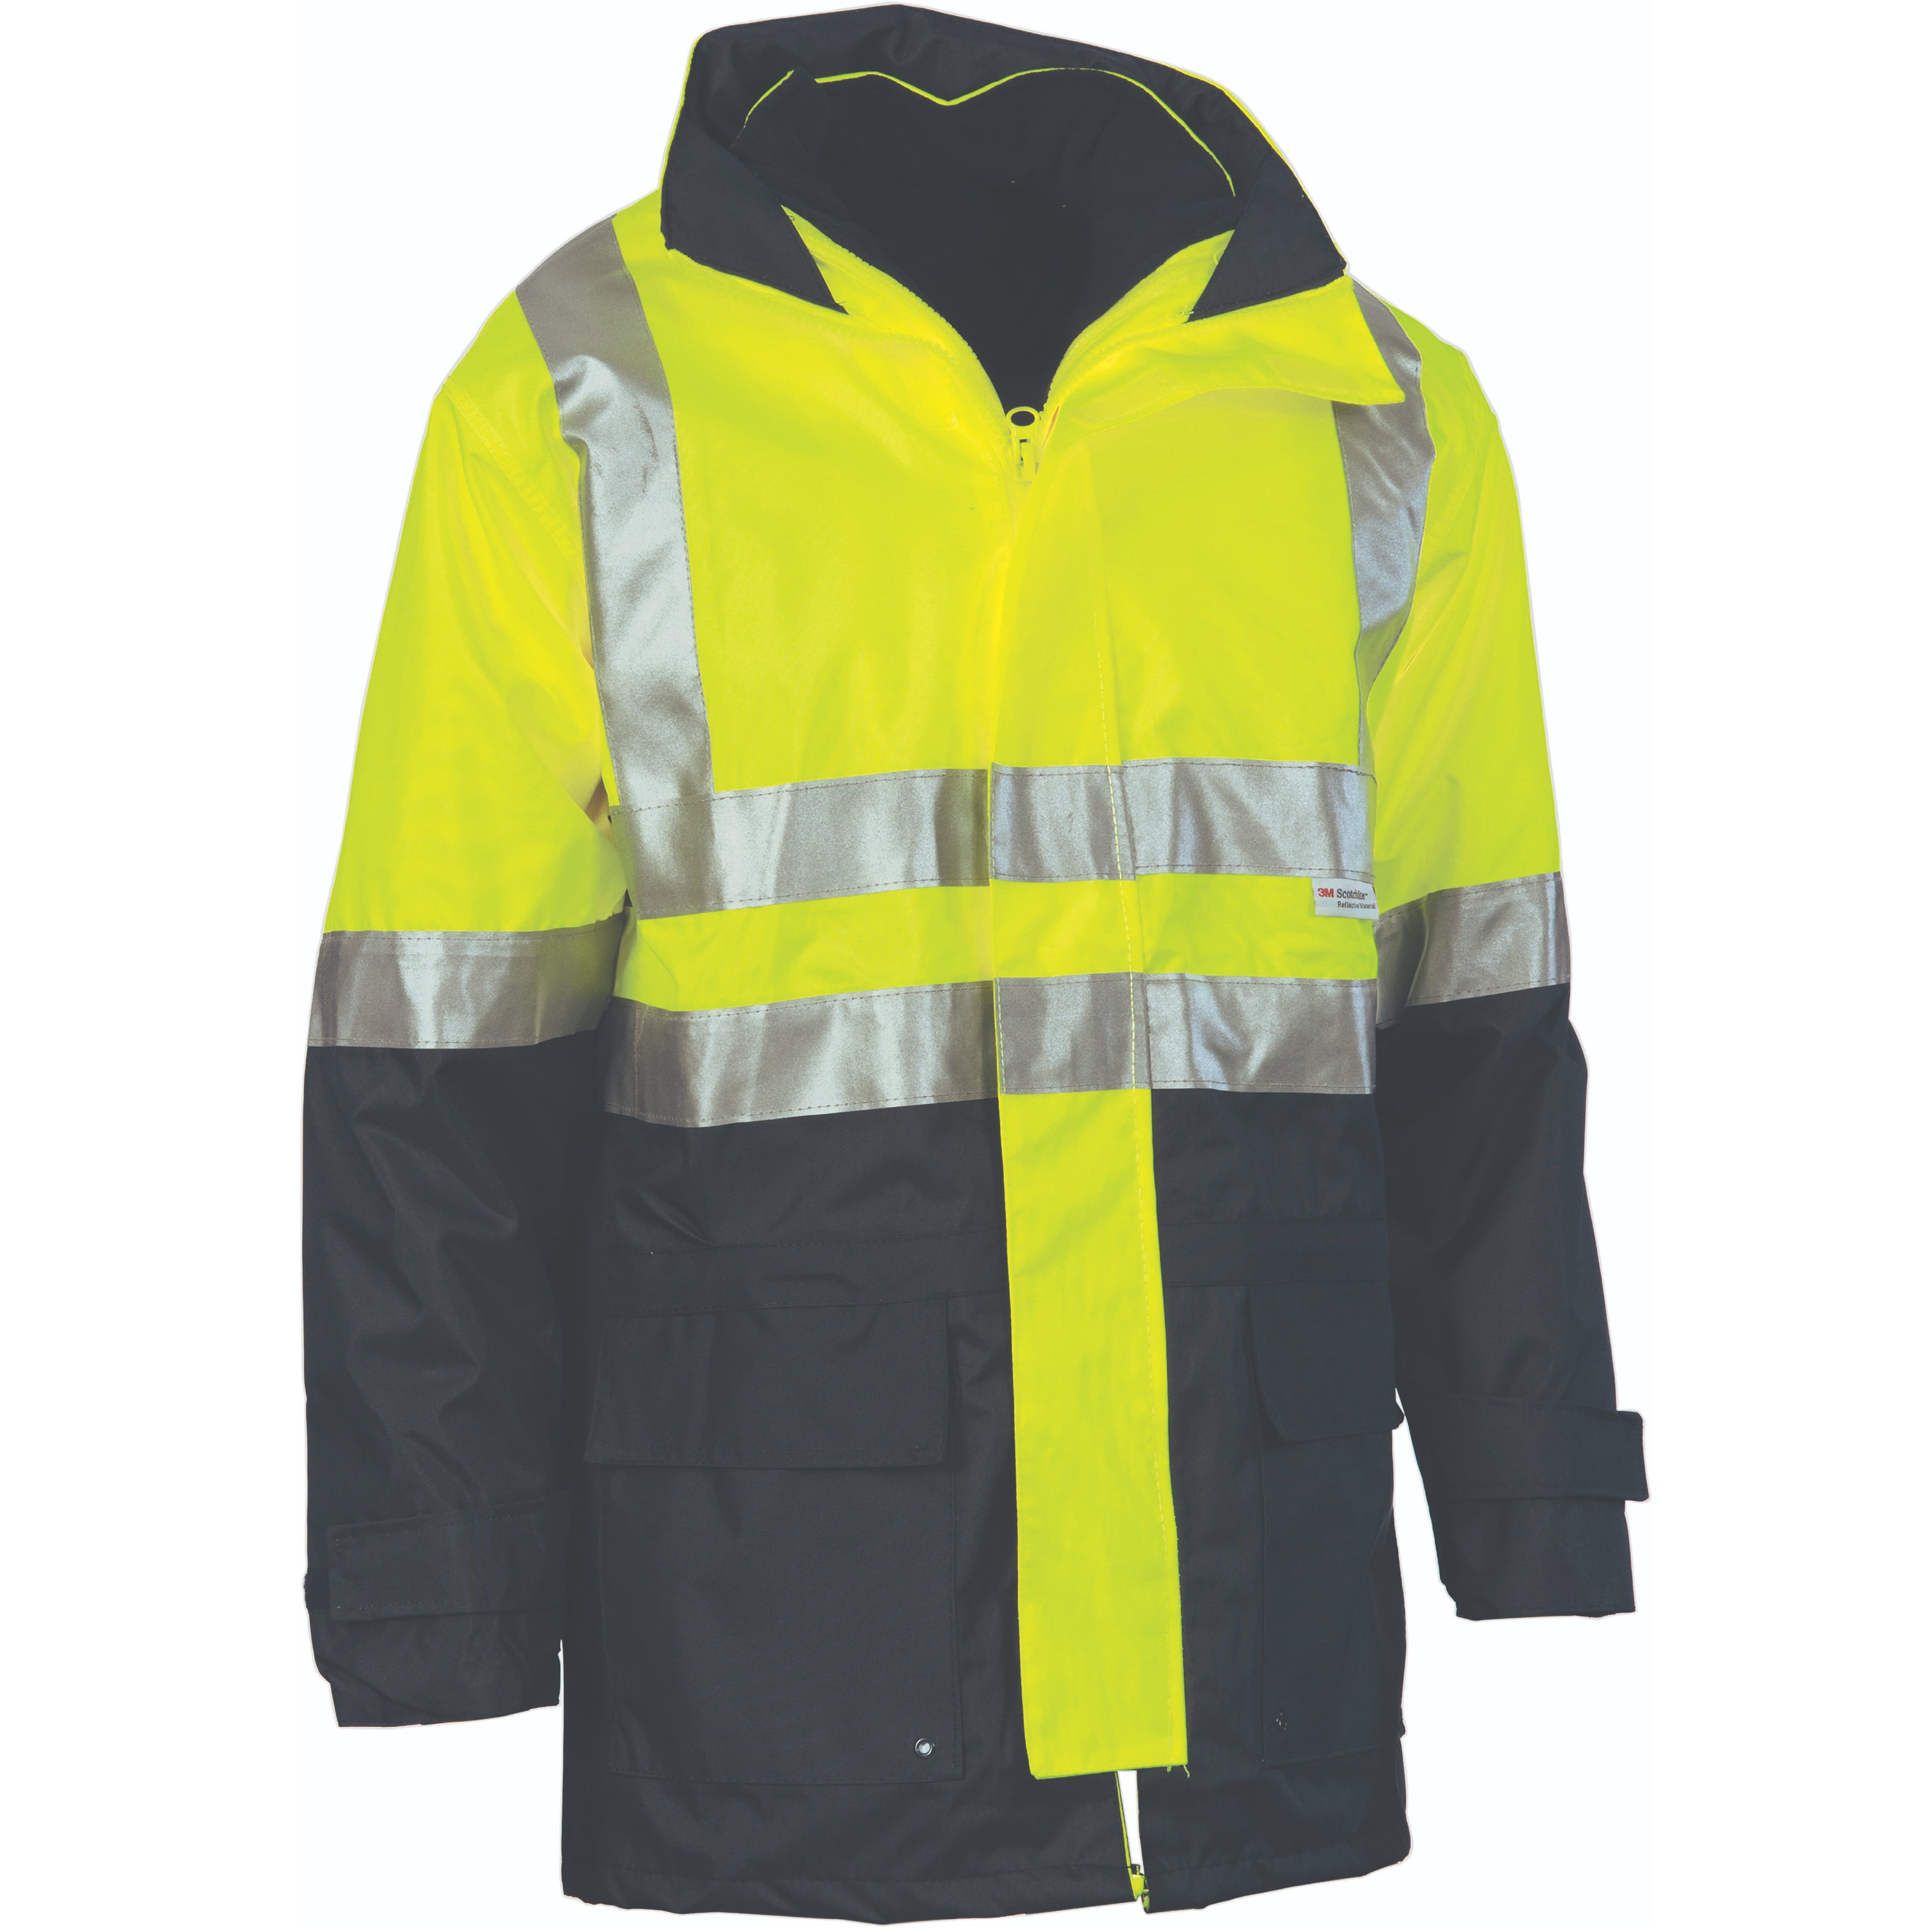 DNC - 3864 -  4 in 1 HiVis Two Tone Breathable Jacket with Vest and 3M Reflective Tape